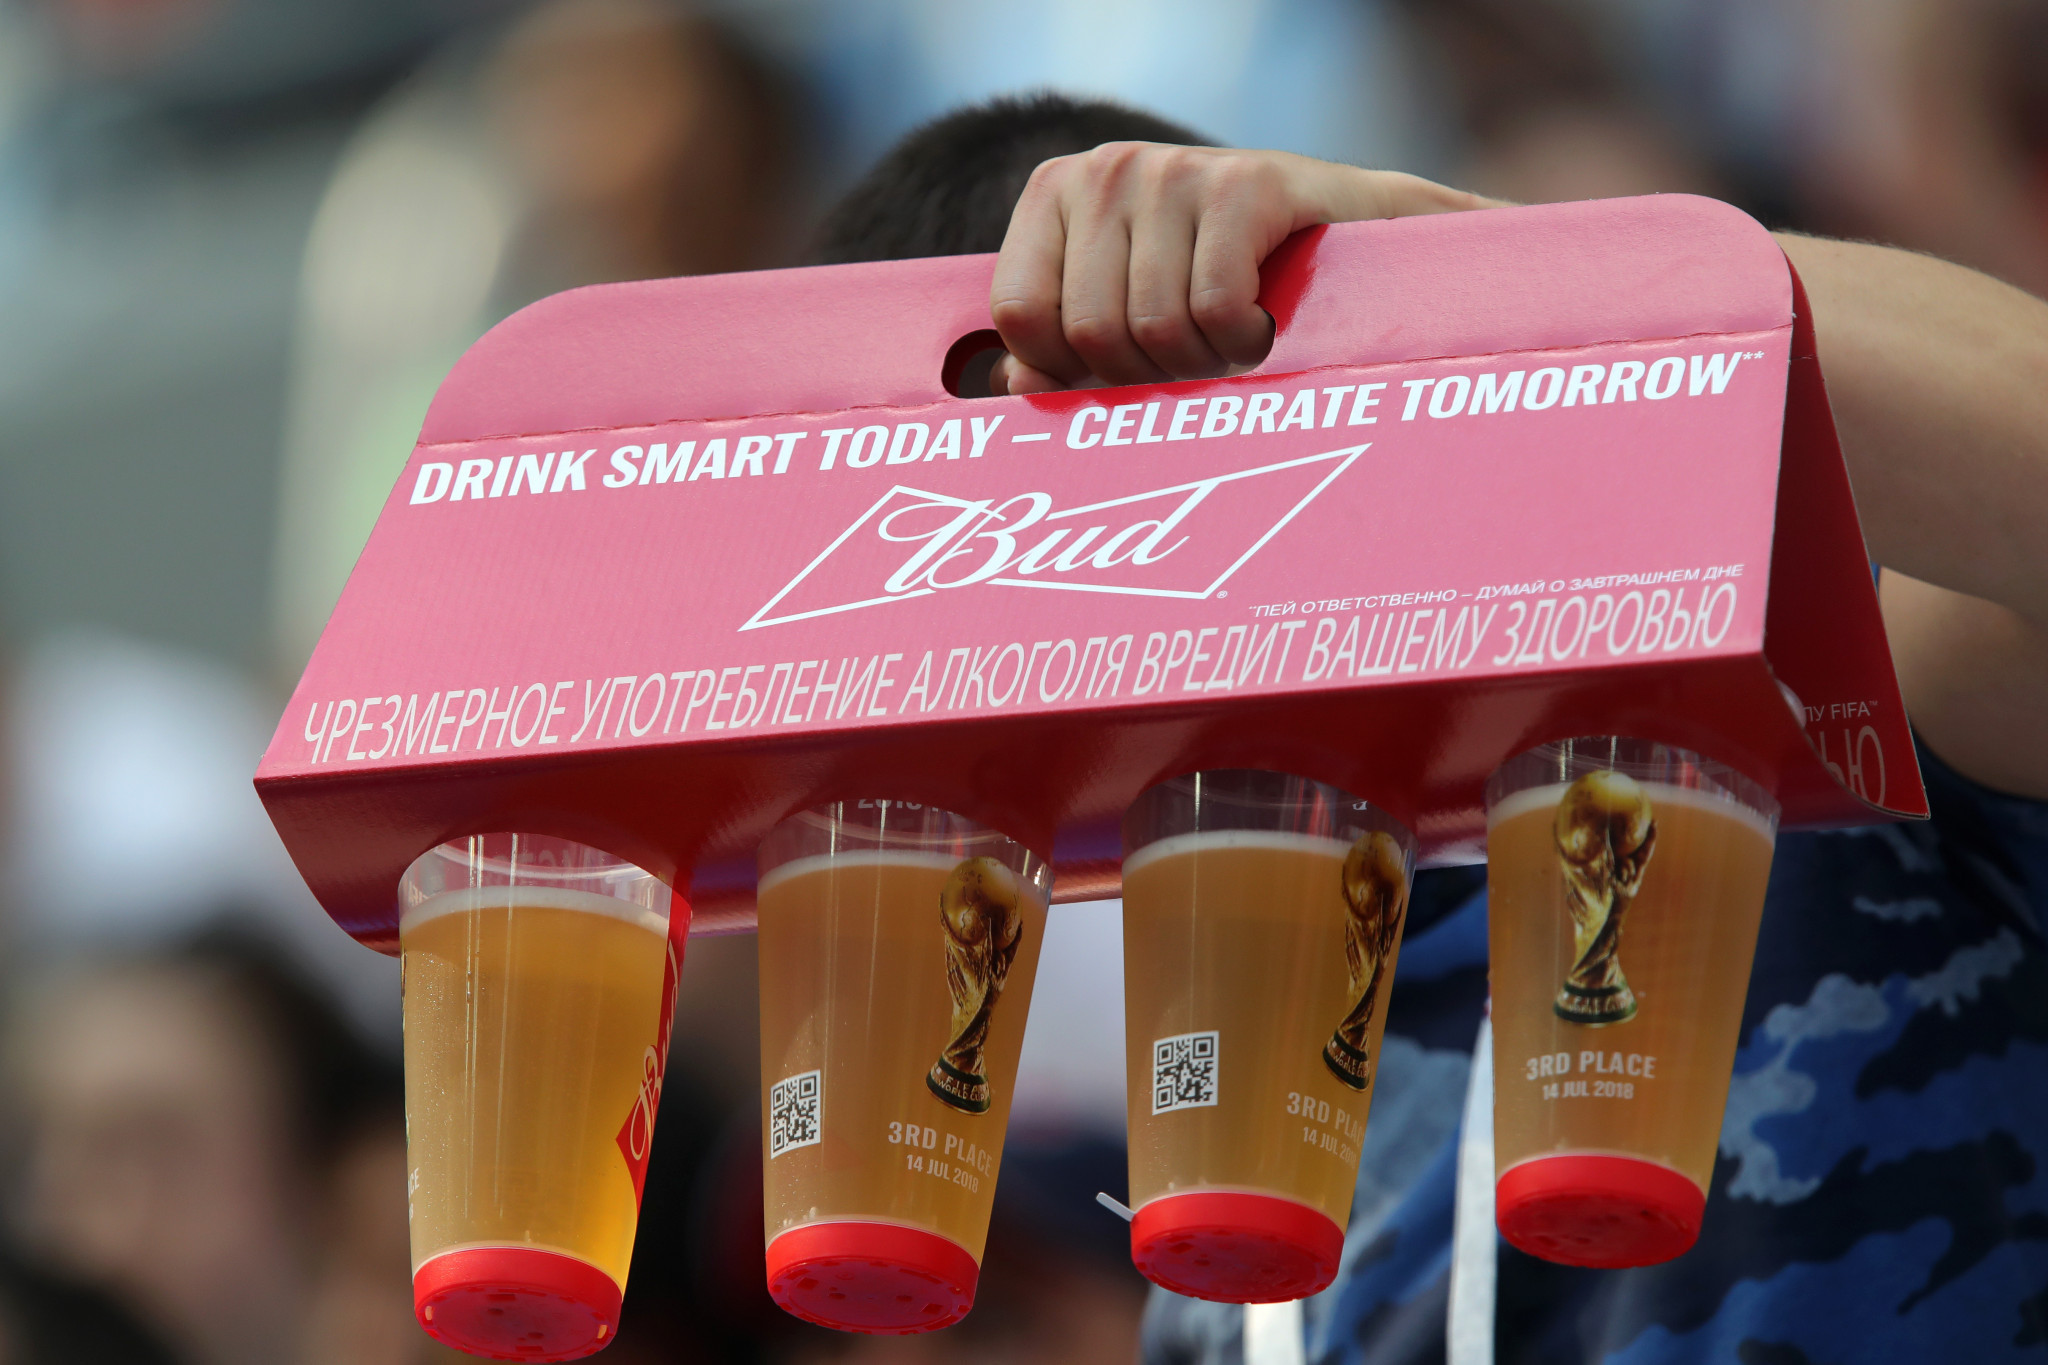 FIFA lobbying Qatari officials to allow sale of alcohol in stadiums at 2022 FIFA World Cup